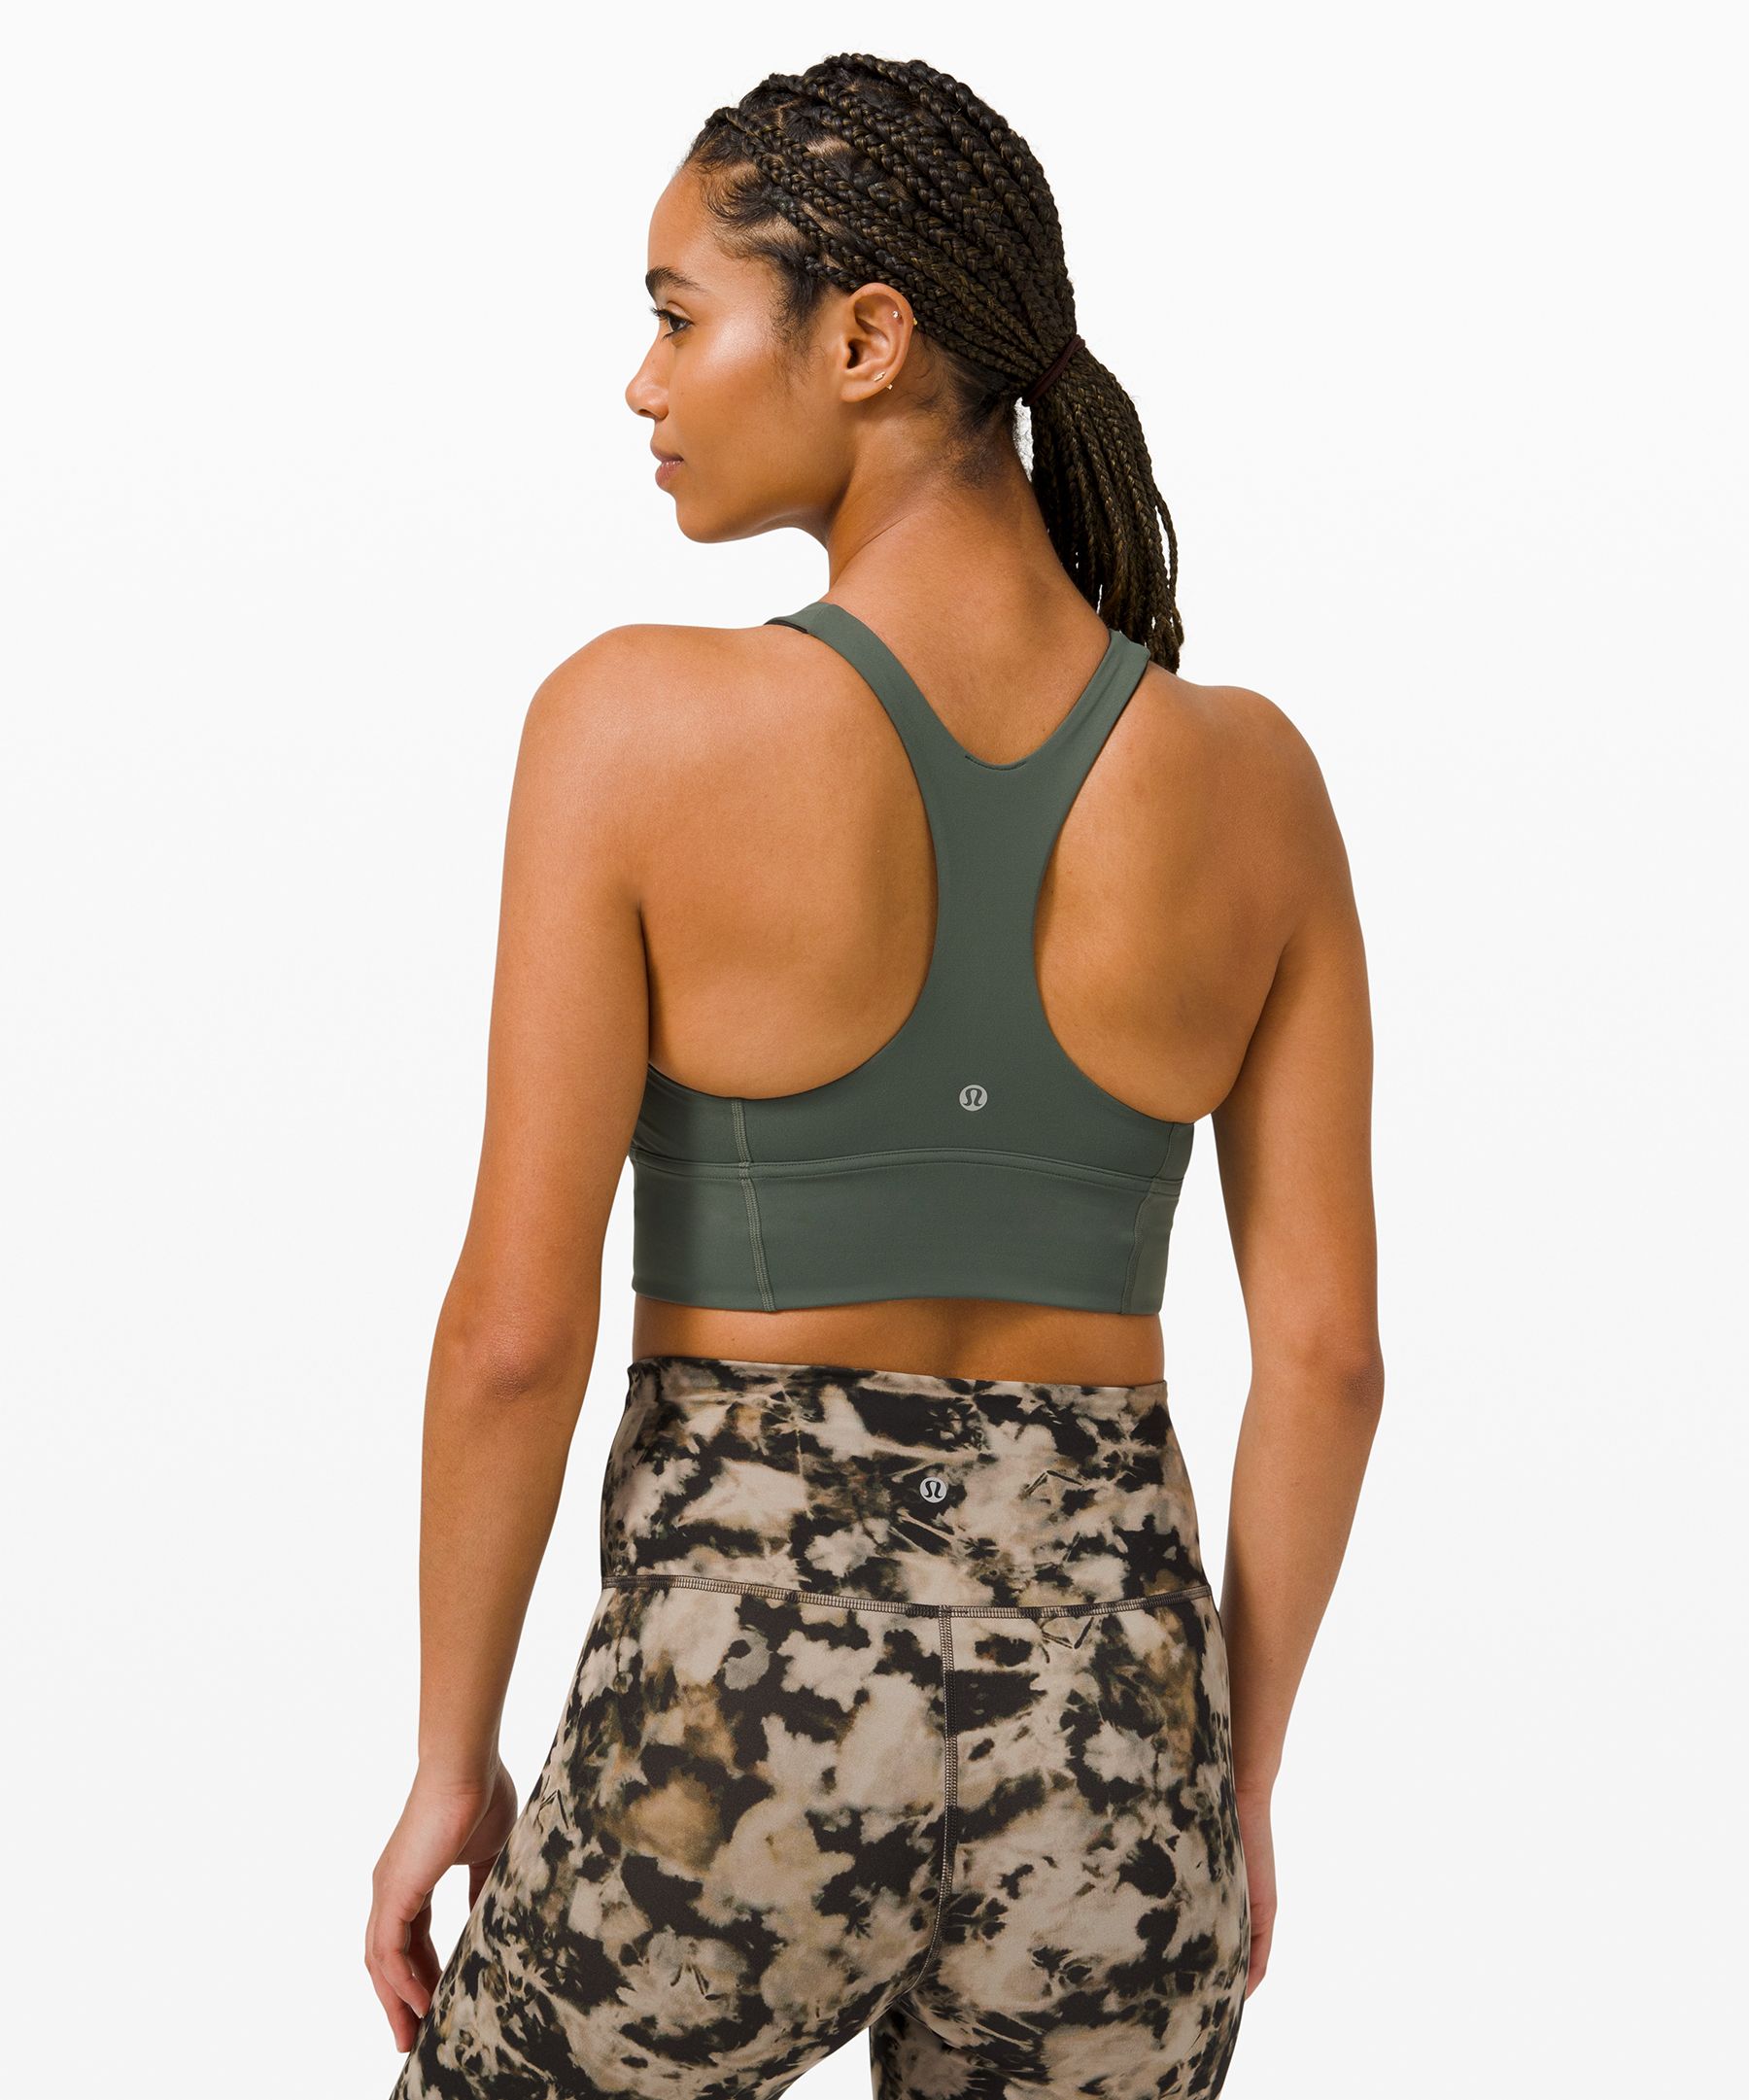 Lululemon Wunder Train Bra Review   International Society of  Precision Agriculture